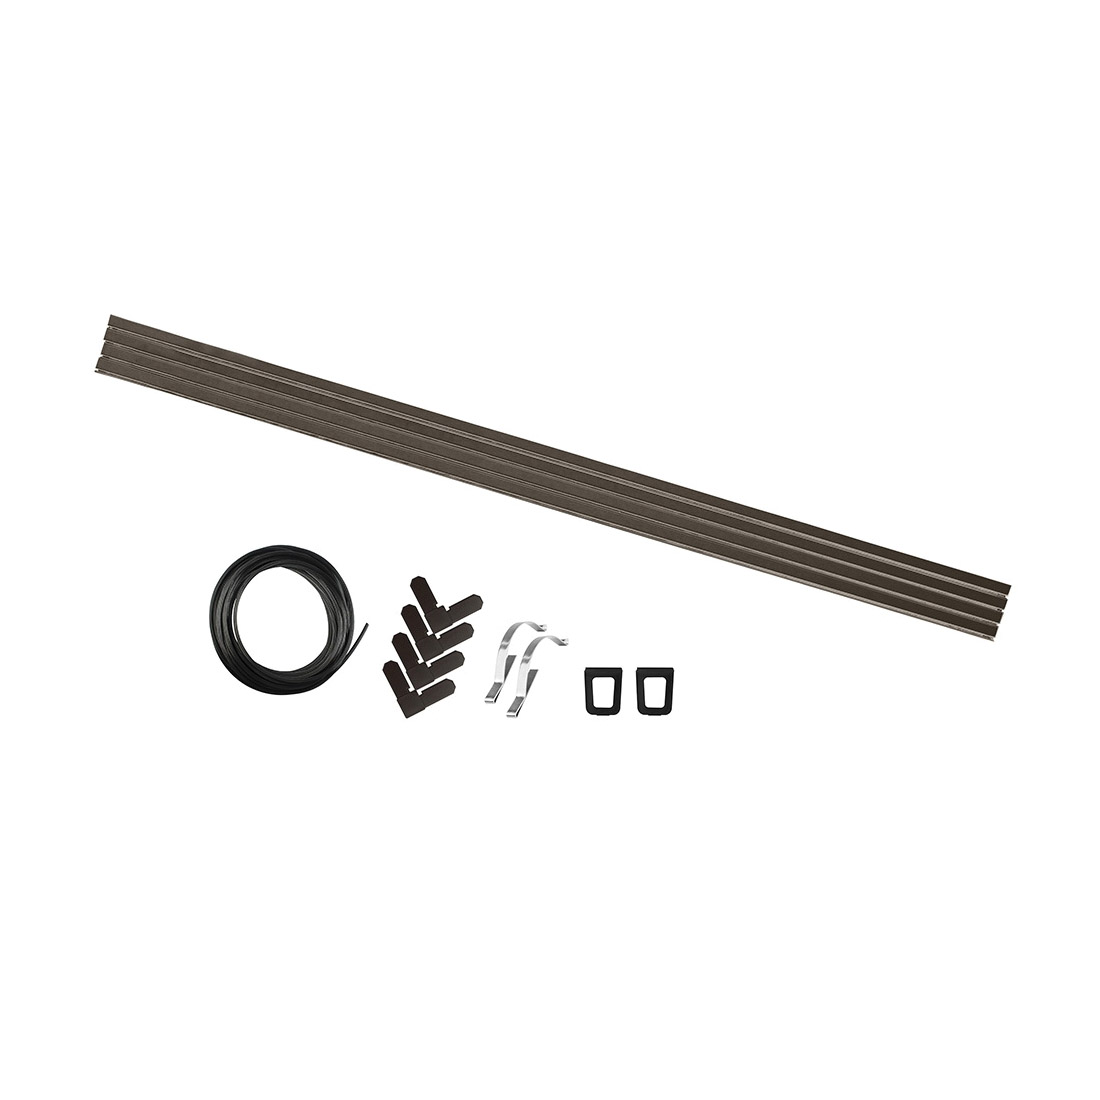 14106 Screen Replacement Kit, Aluminum, Bronze, For: 5/16 in Frames